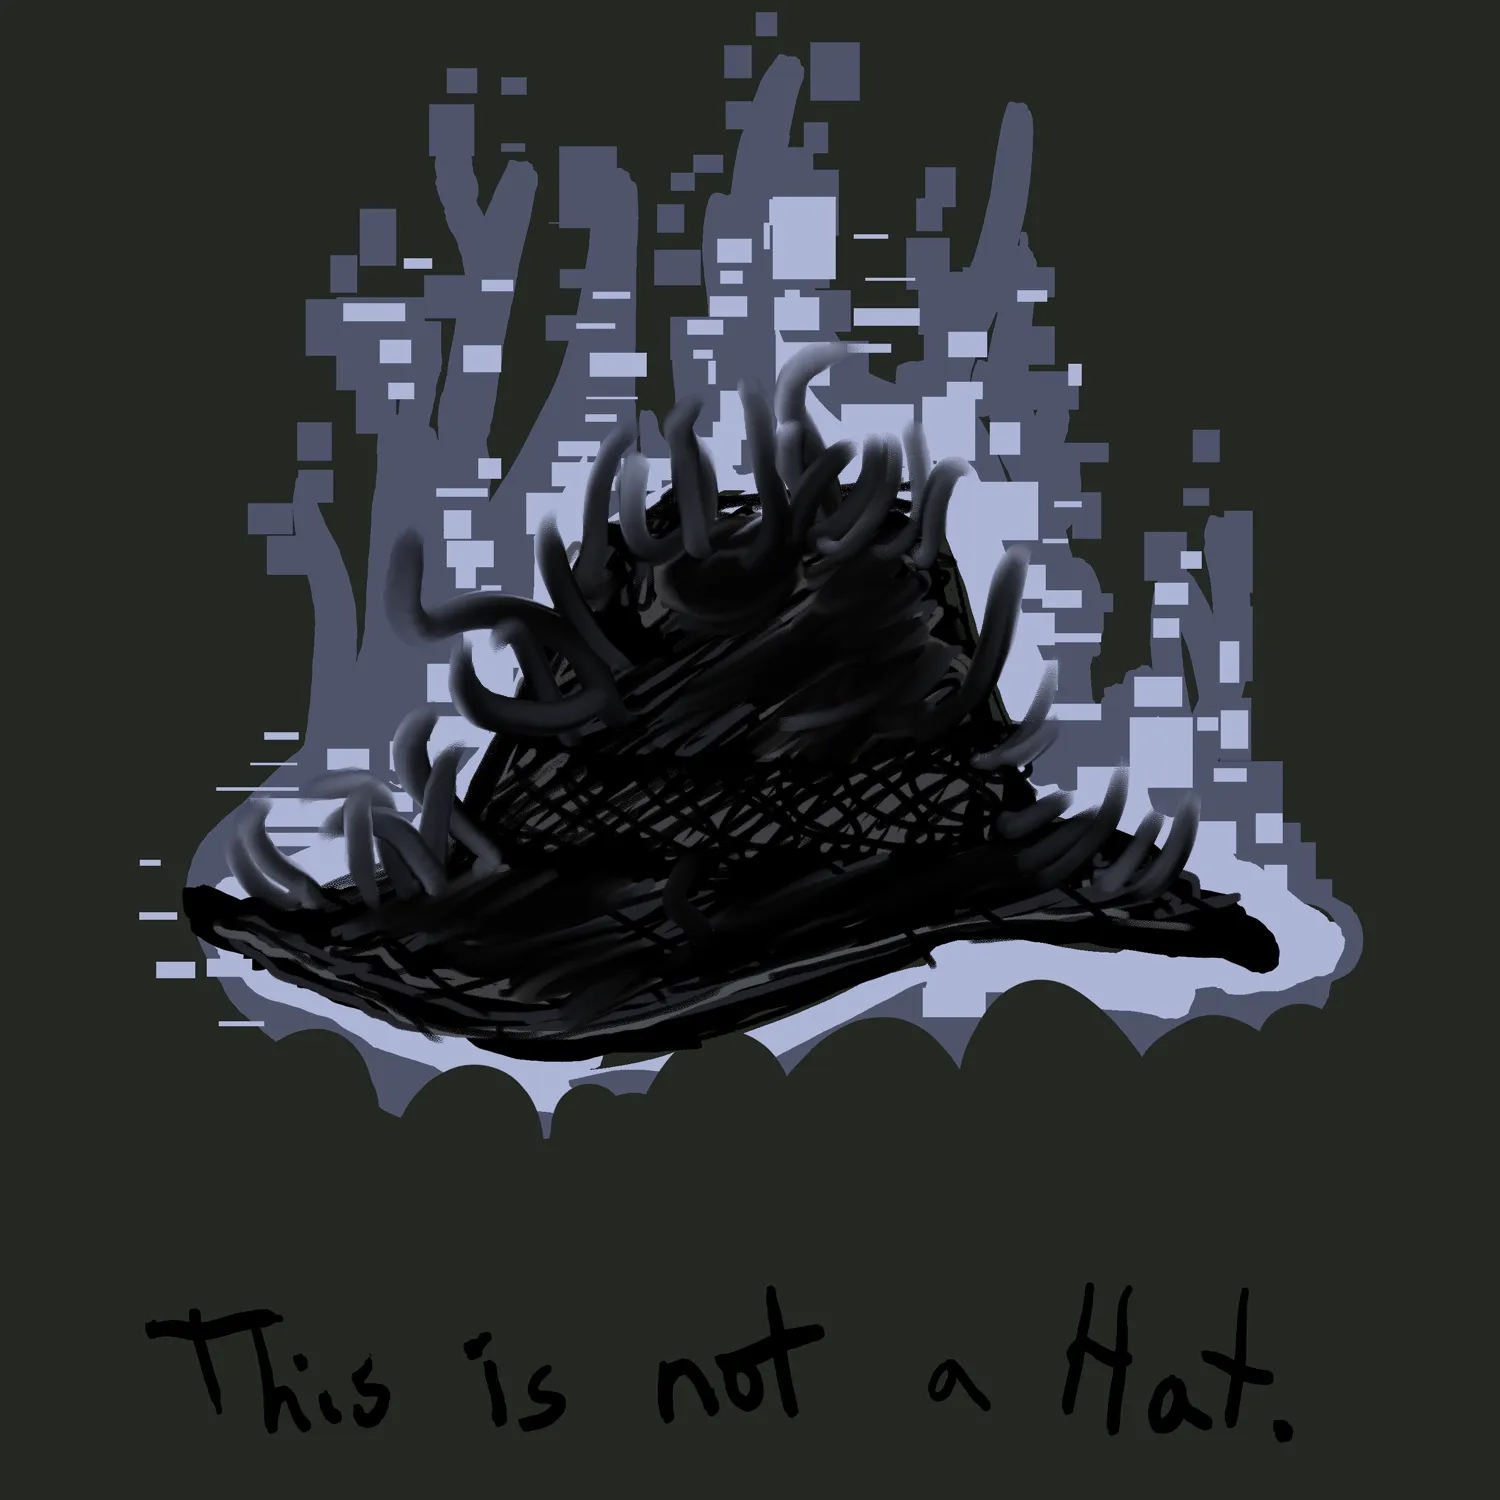 This is not a Hat